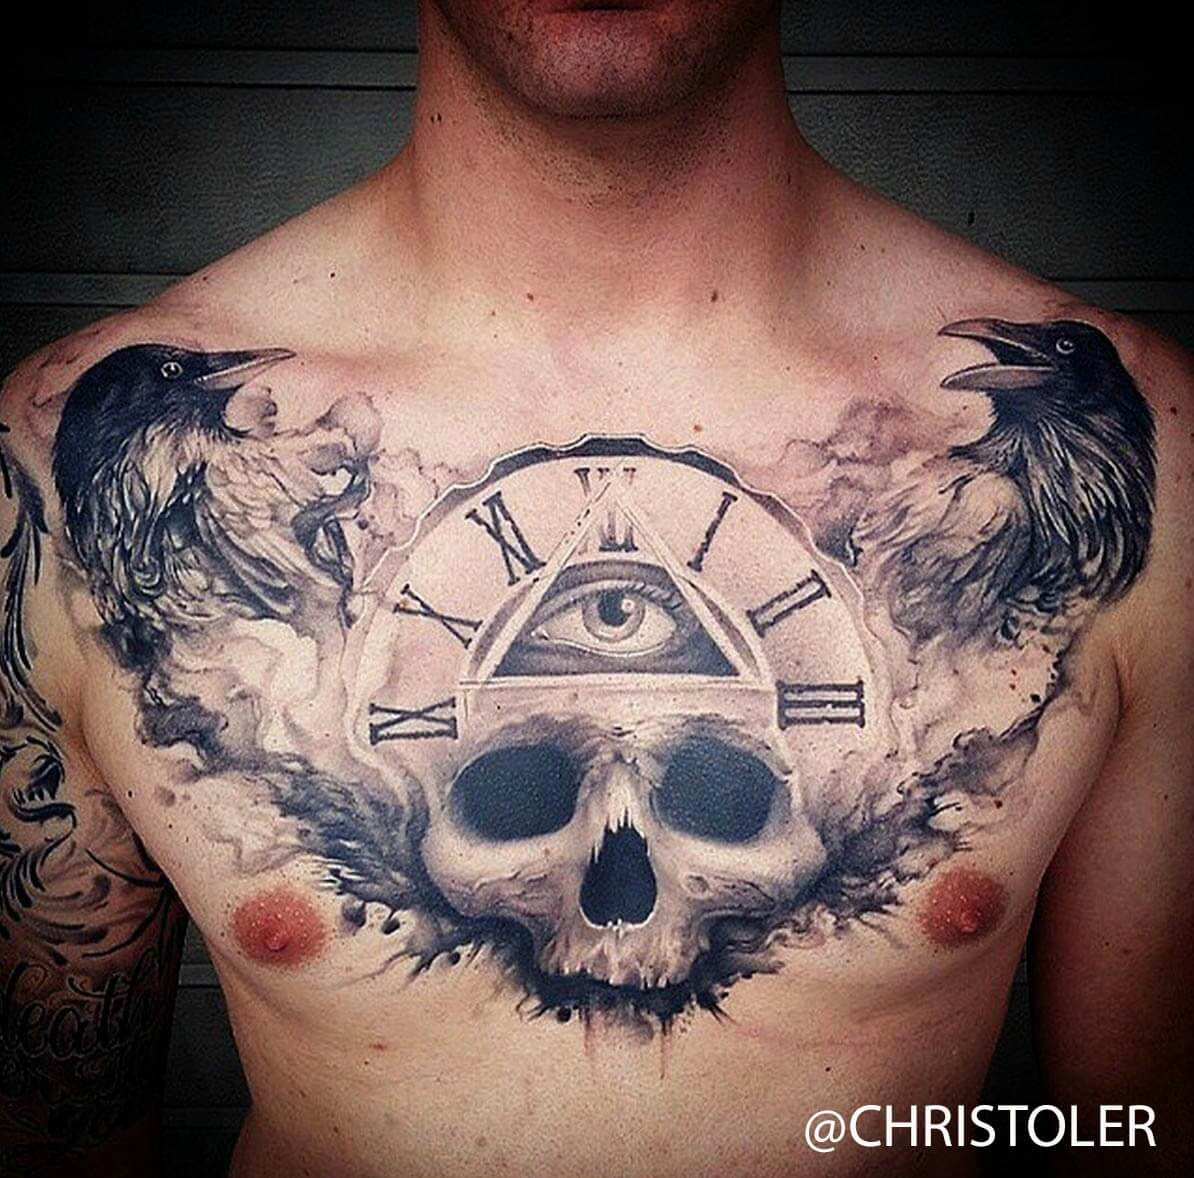 The 100 Best Chest Tattoos For Men Improb with regard to dimensions 1194 X 1178